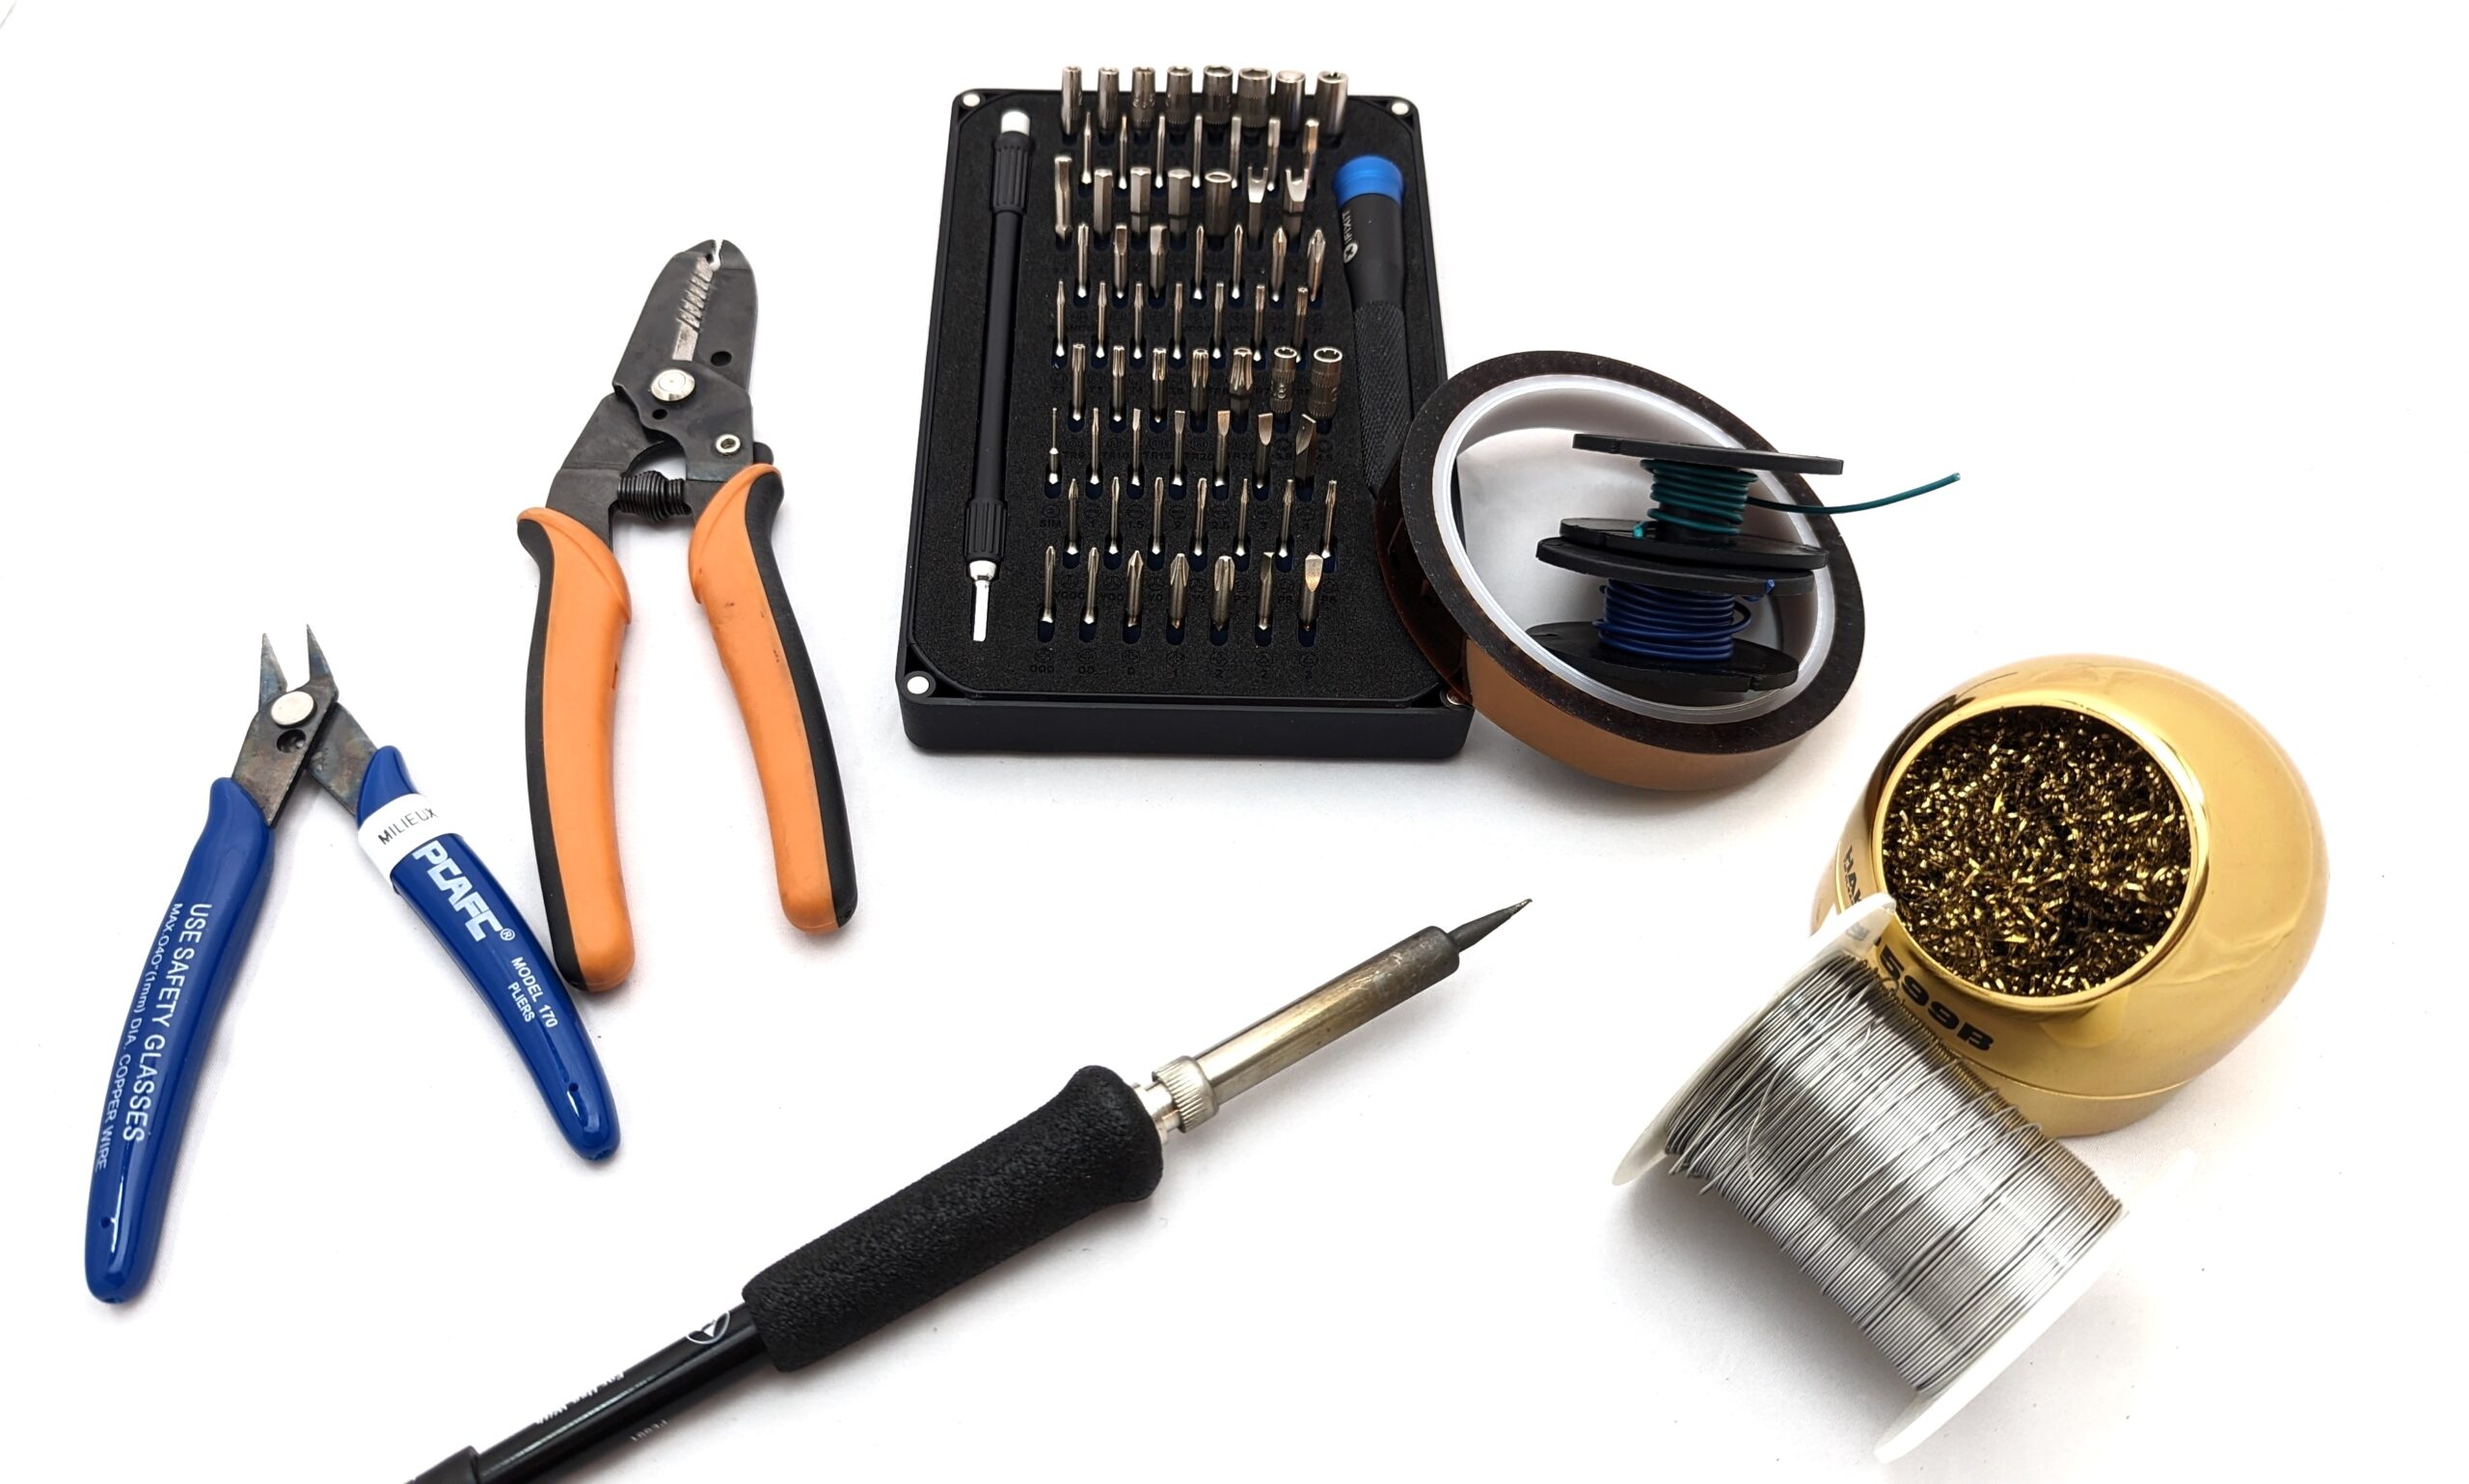 A collection of tools, including a soldering iron, wire strippers, solder, and a screwdriver kit.